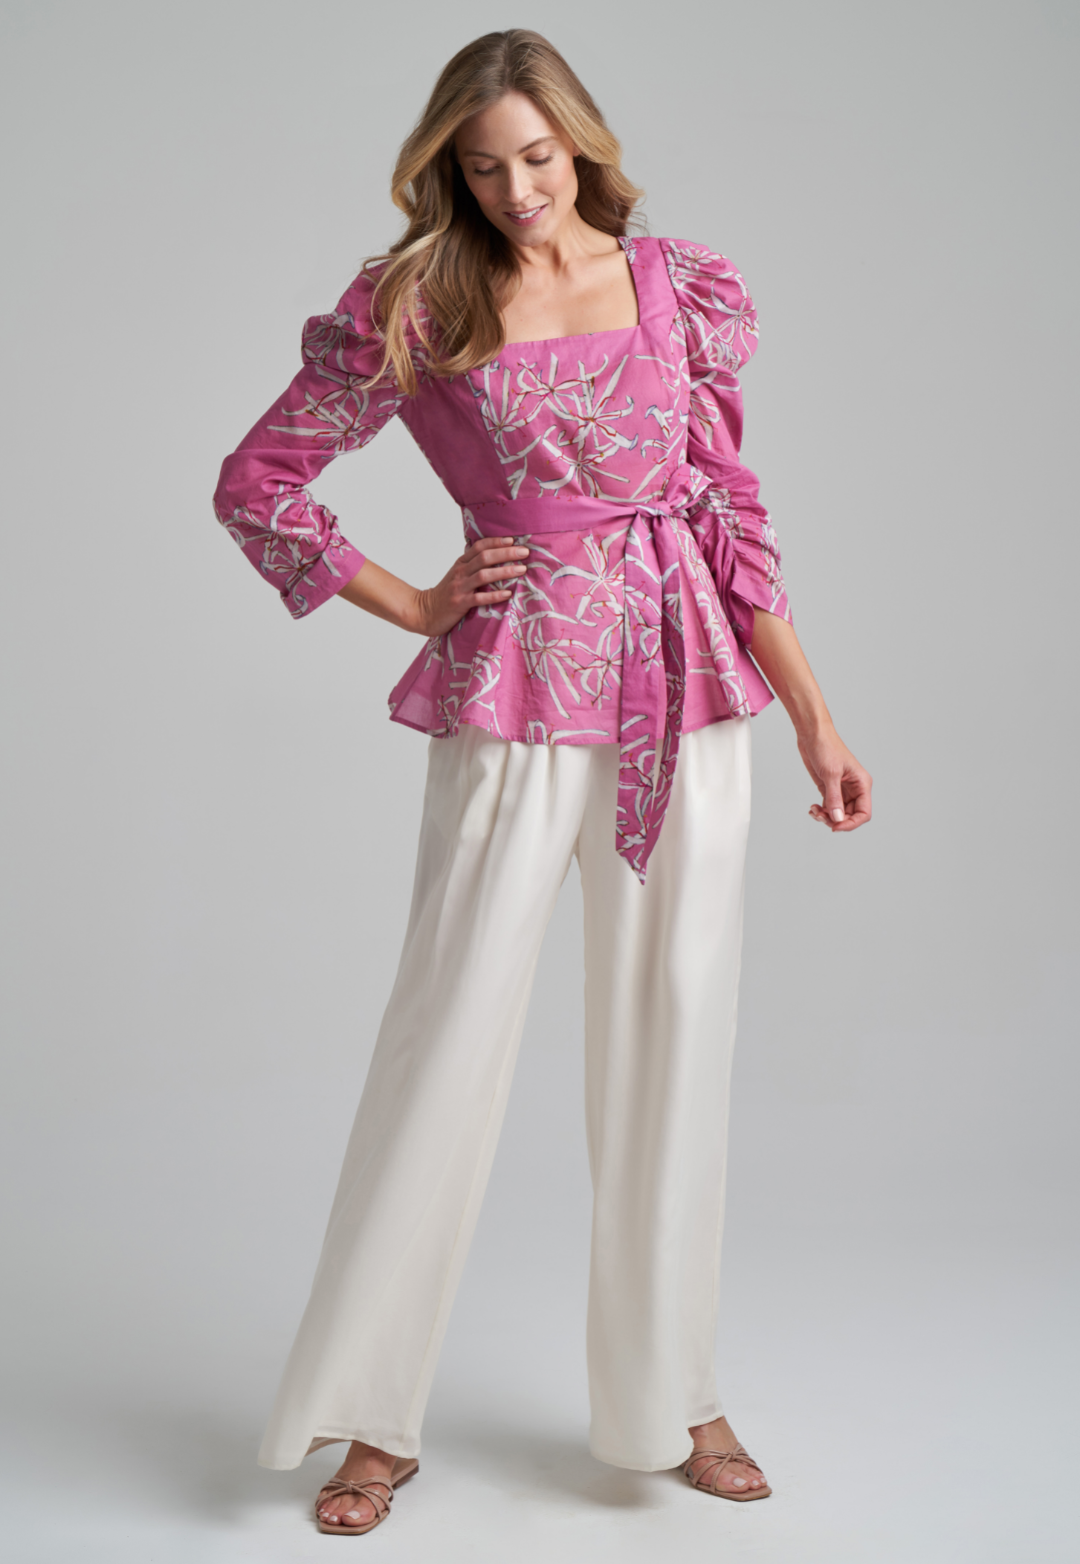 Woman wearing cotton puffed sleeve square neck blouse with belt in watermelon spider lily print by Ala von Auersperg for spring summer 2021